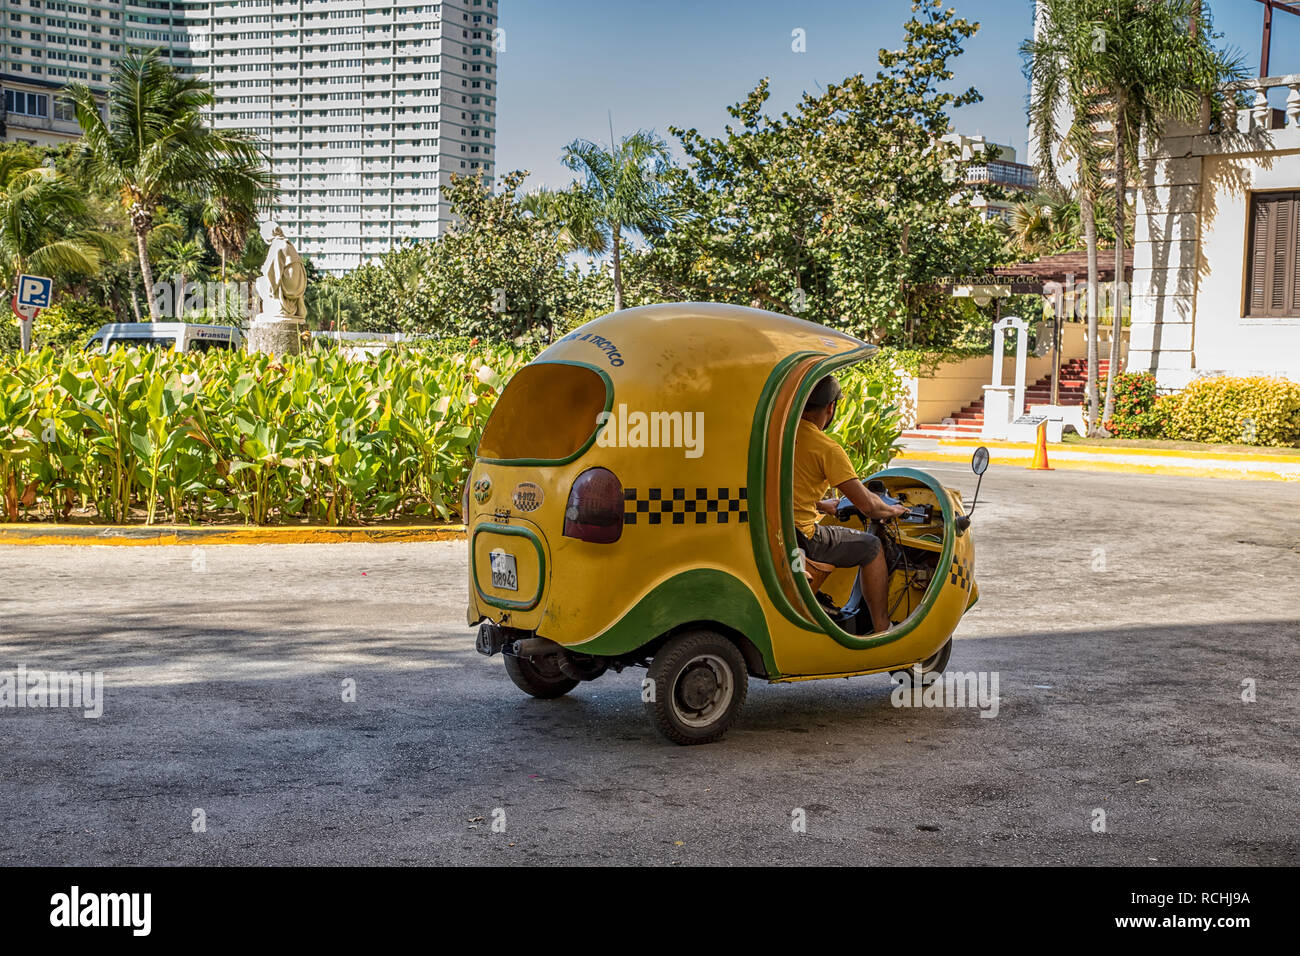 HAVANA, CUBA - December 08.2018: Typical Cuban motorbike taxis are known as Coco taxi in Havana, Cuba. Stock Photo